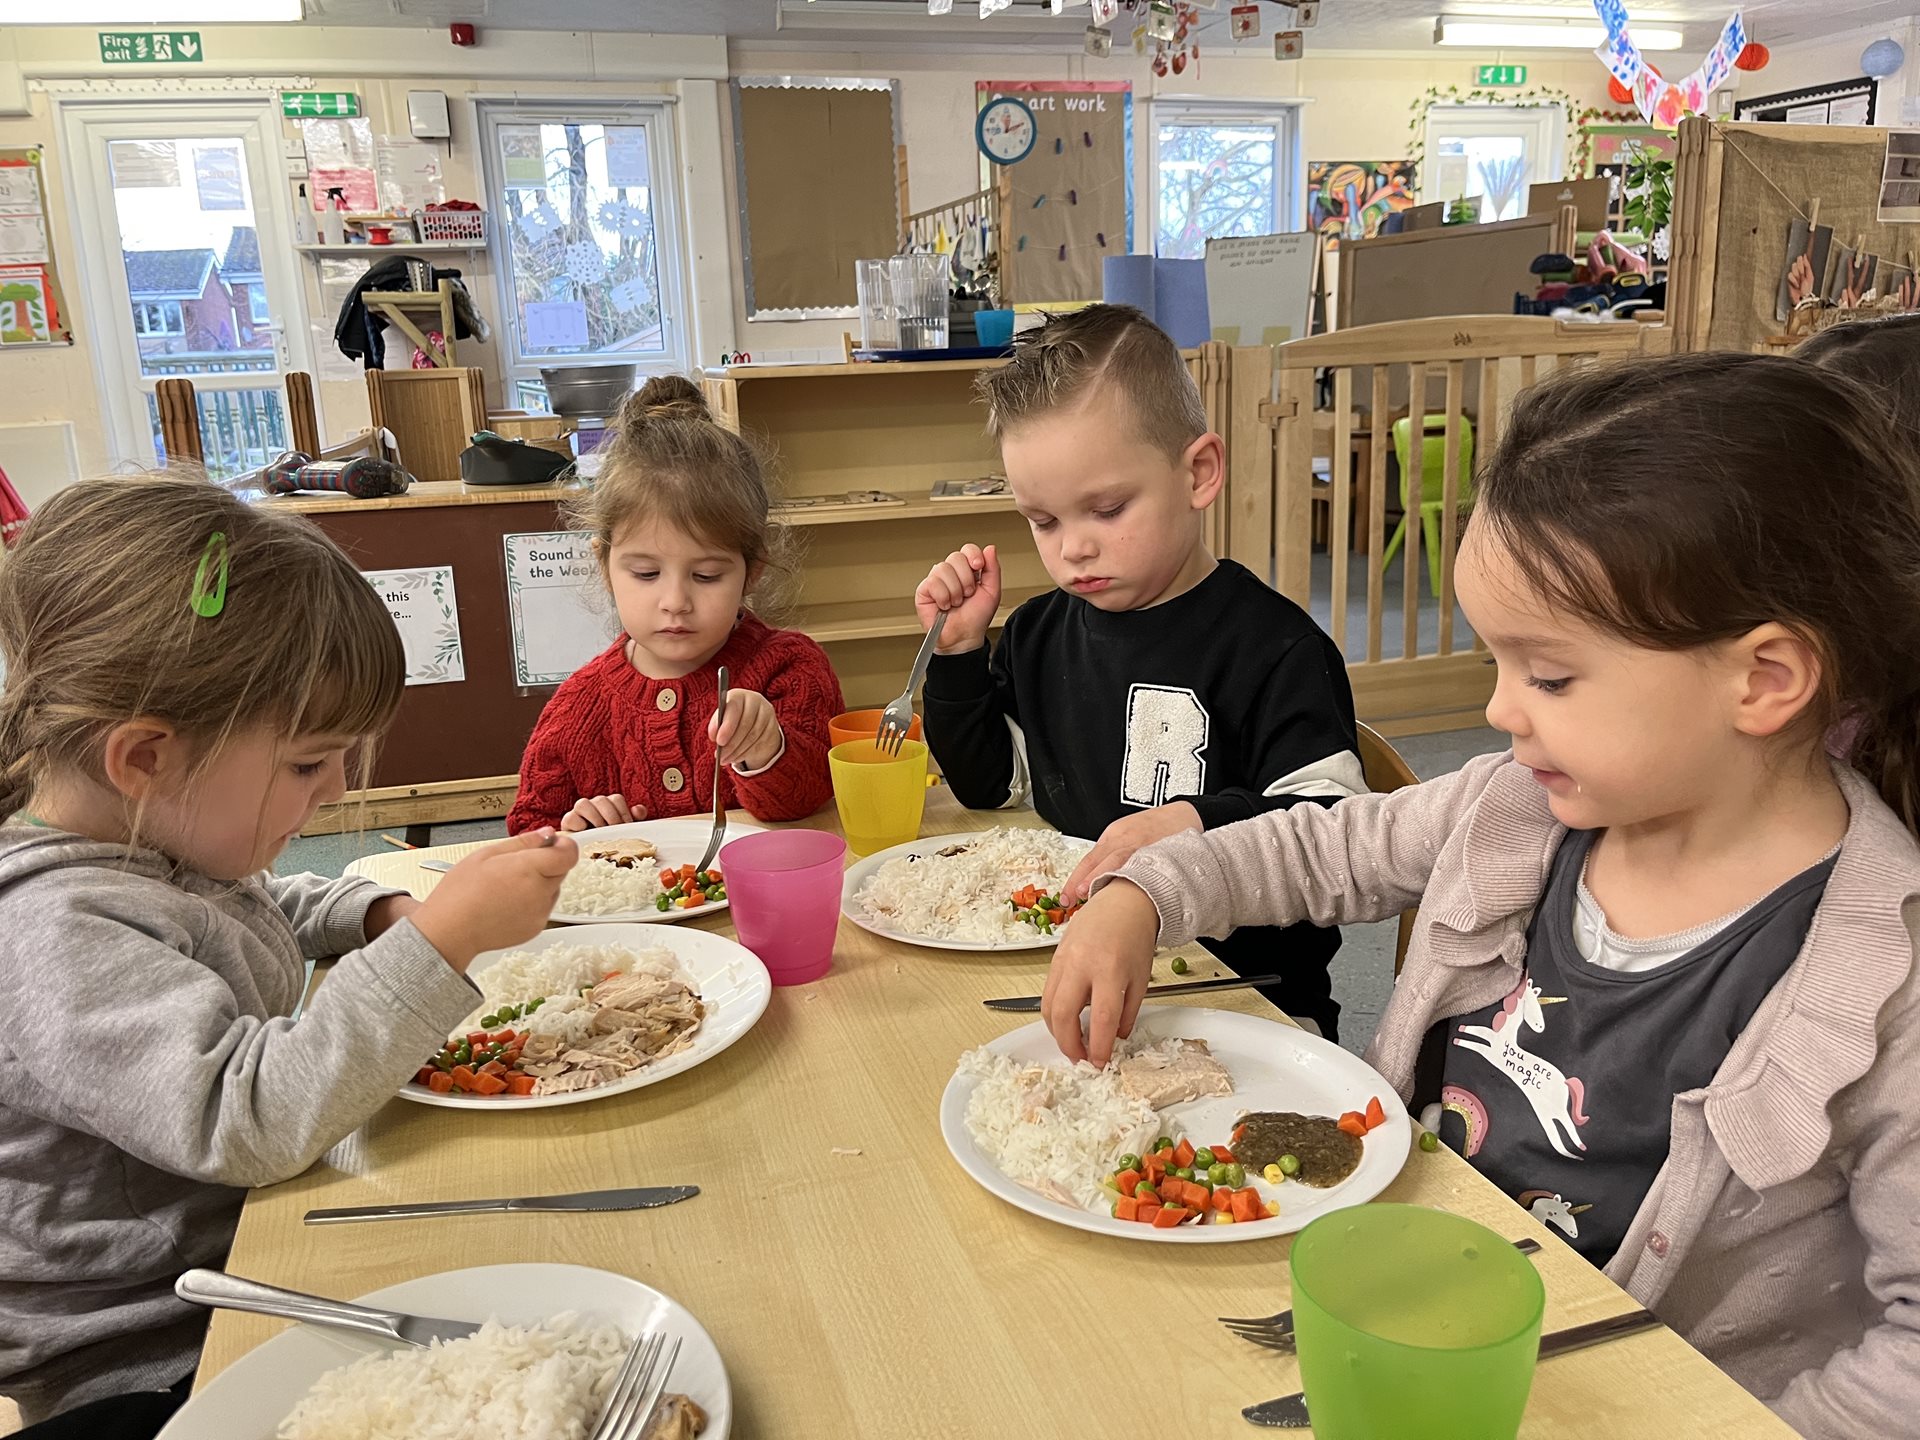 Children eating food at table